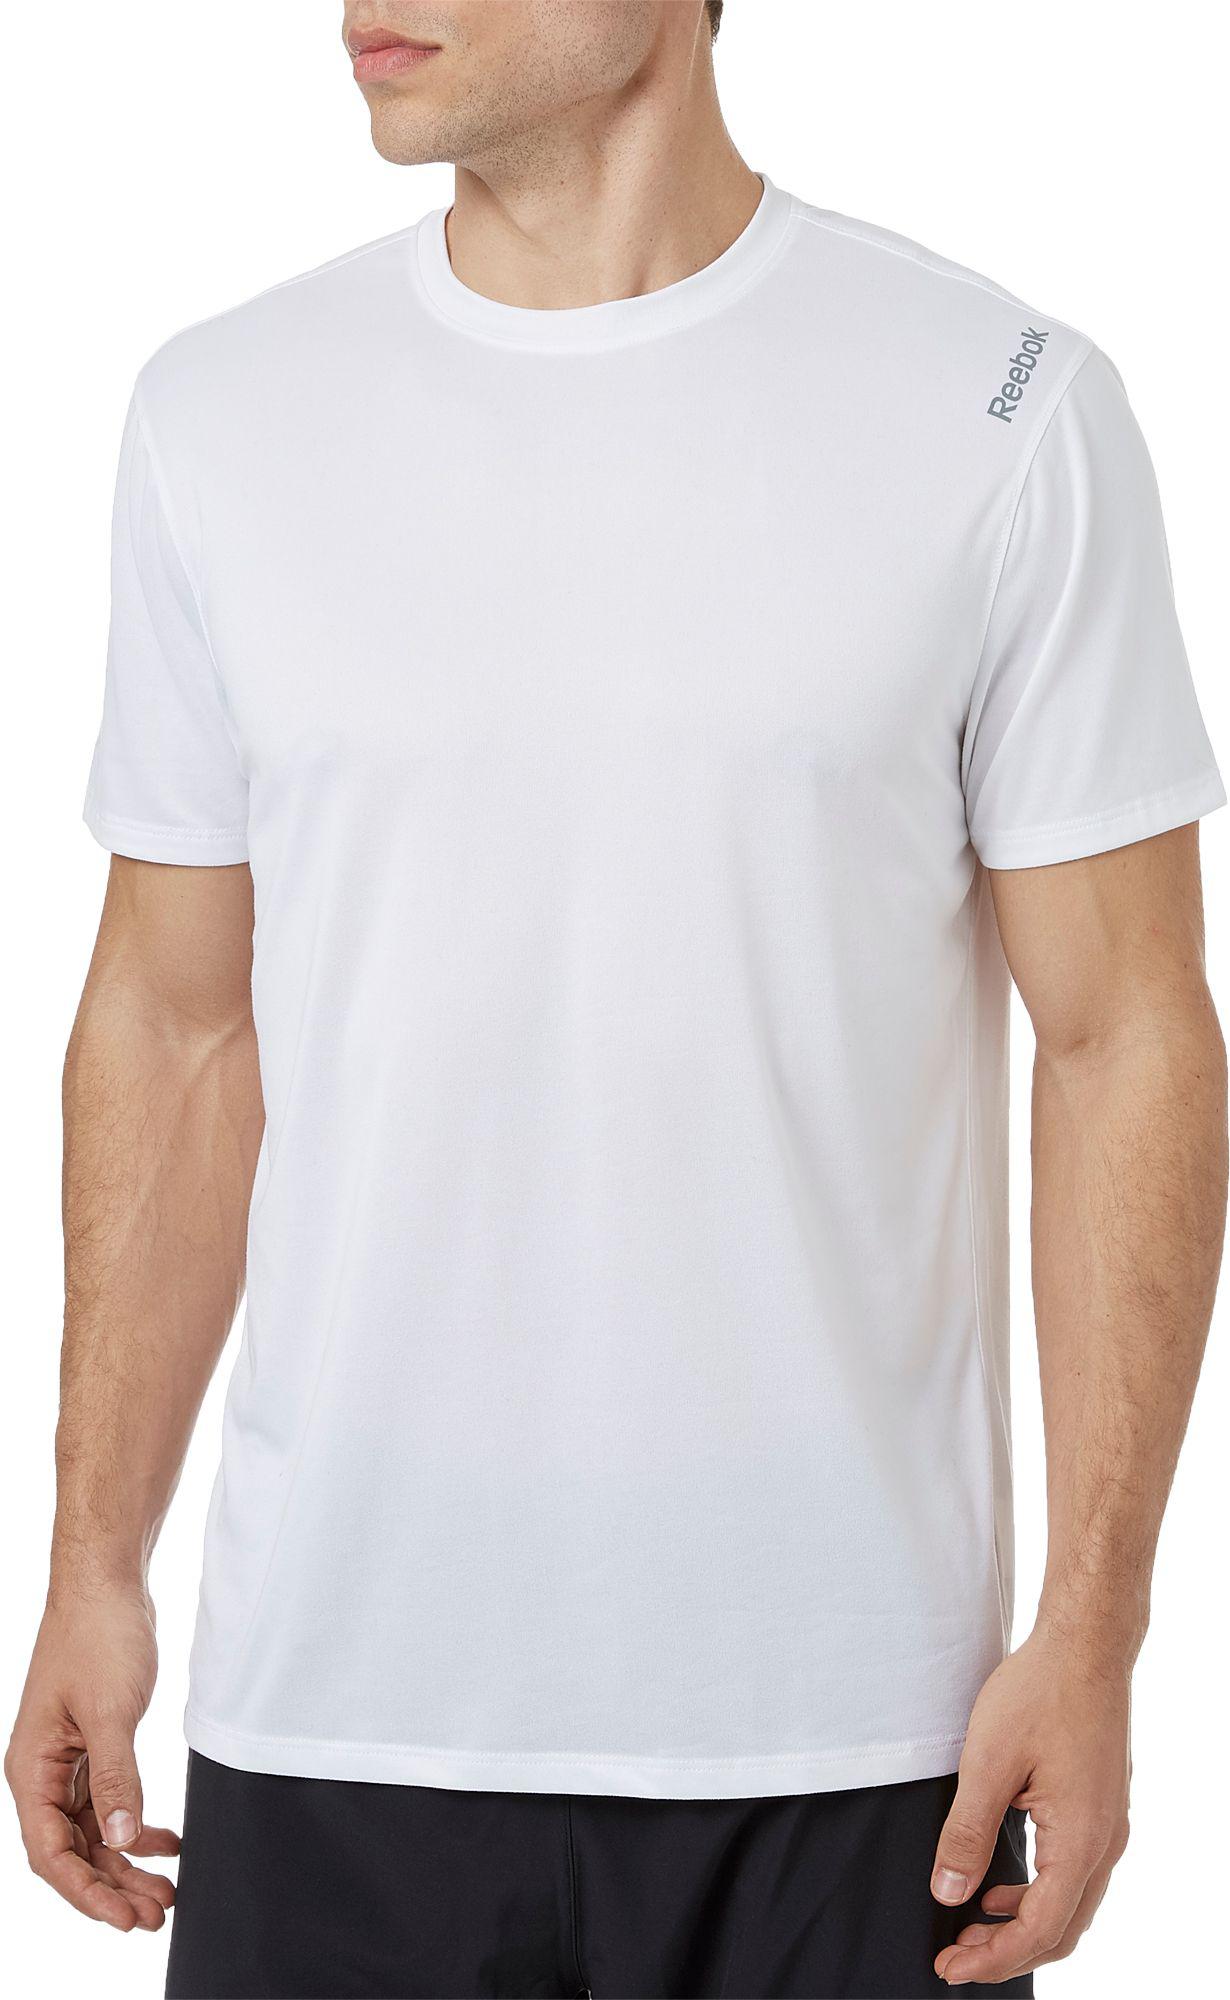 Reebok Synthetic Solid Performance T-shirt in White for Men - Lyst